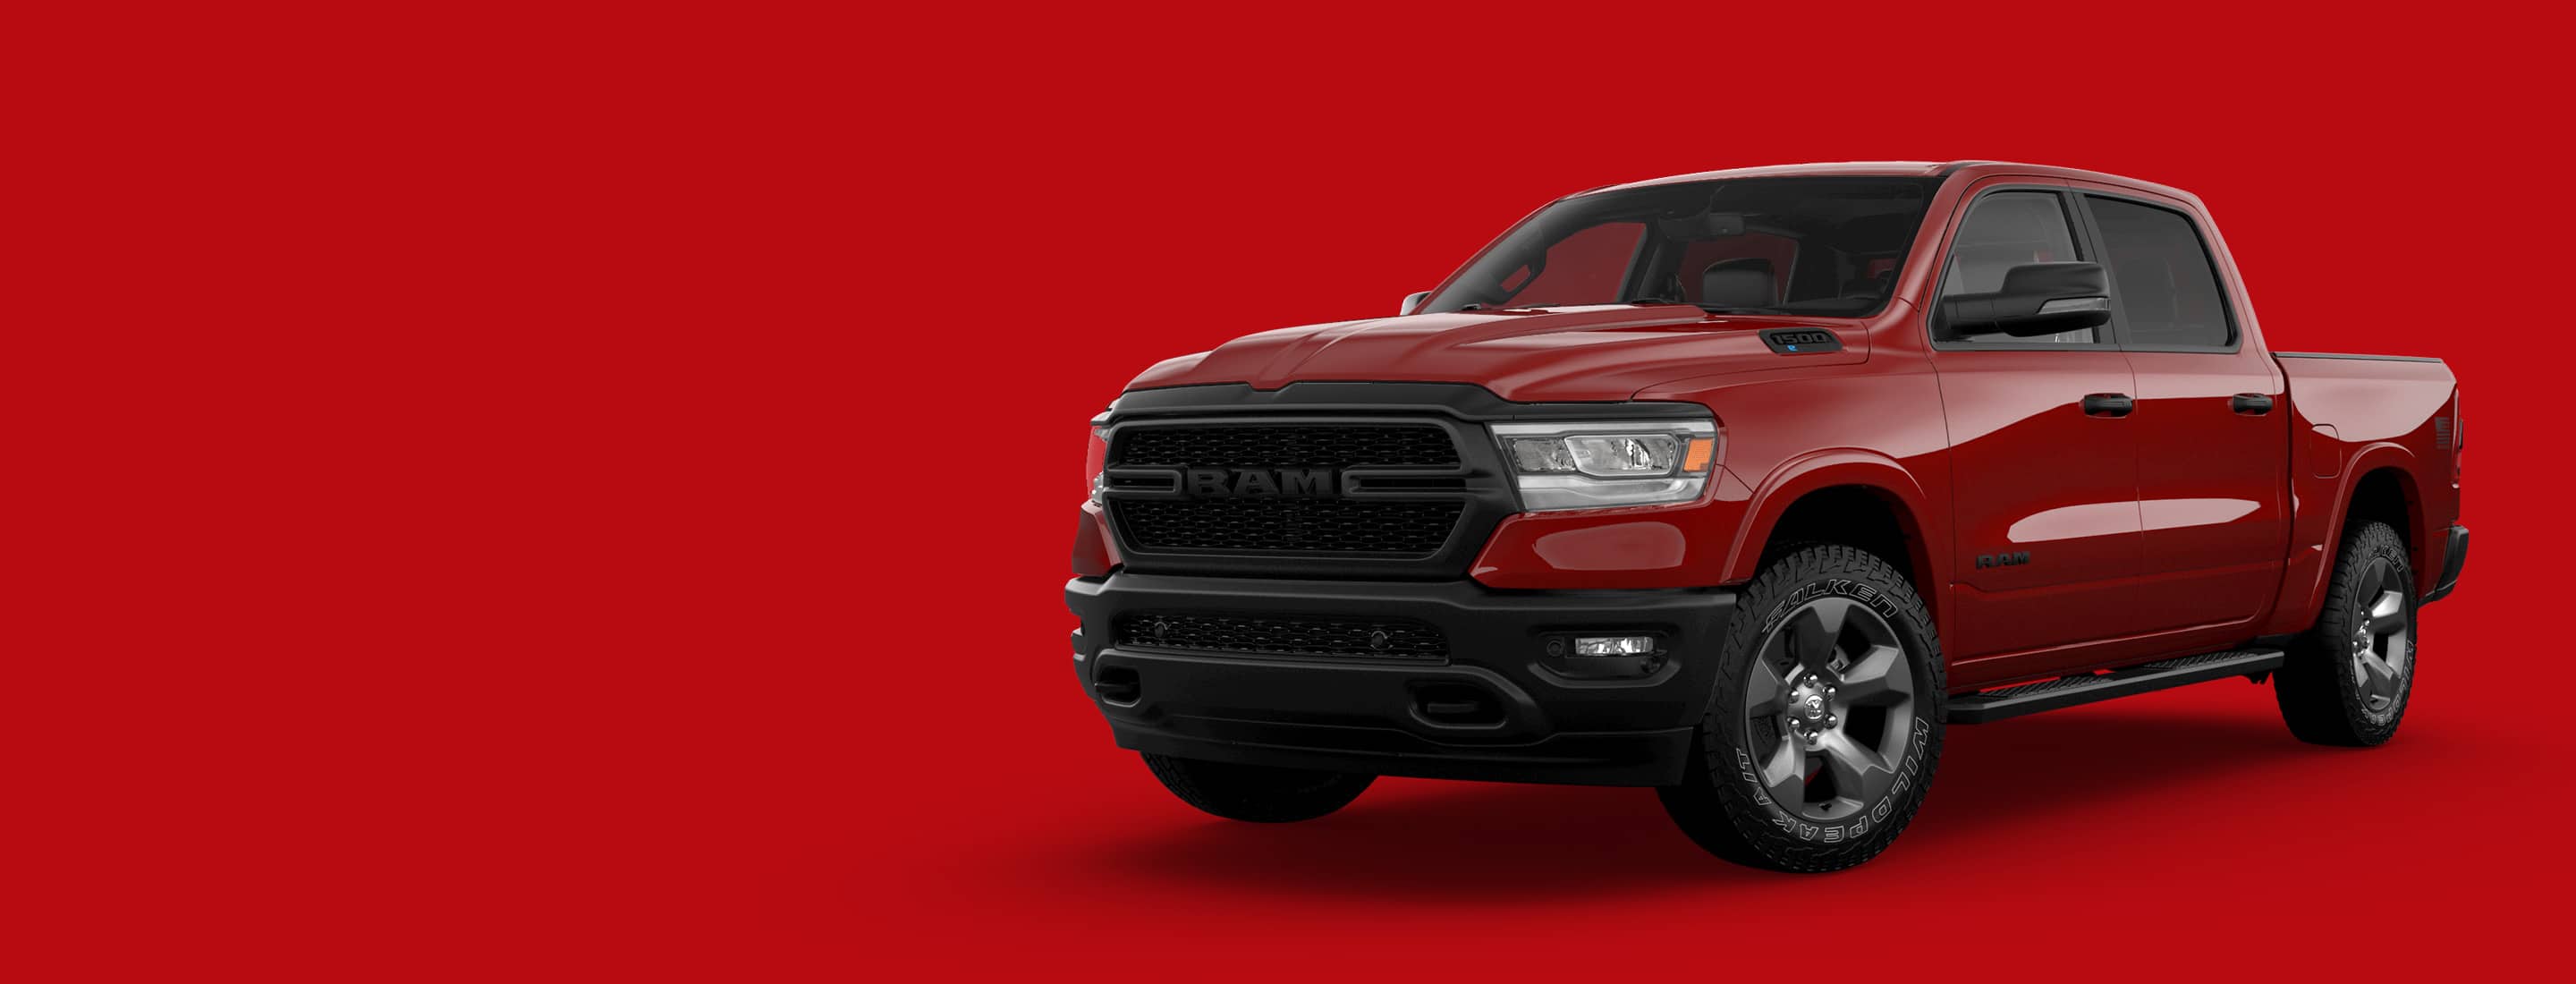 New Built to Serve Ram 1500 Honors First Responders